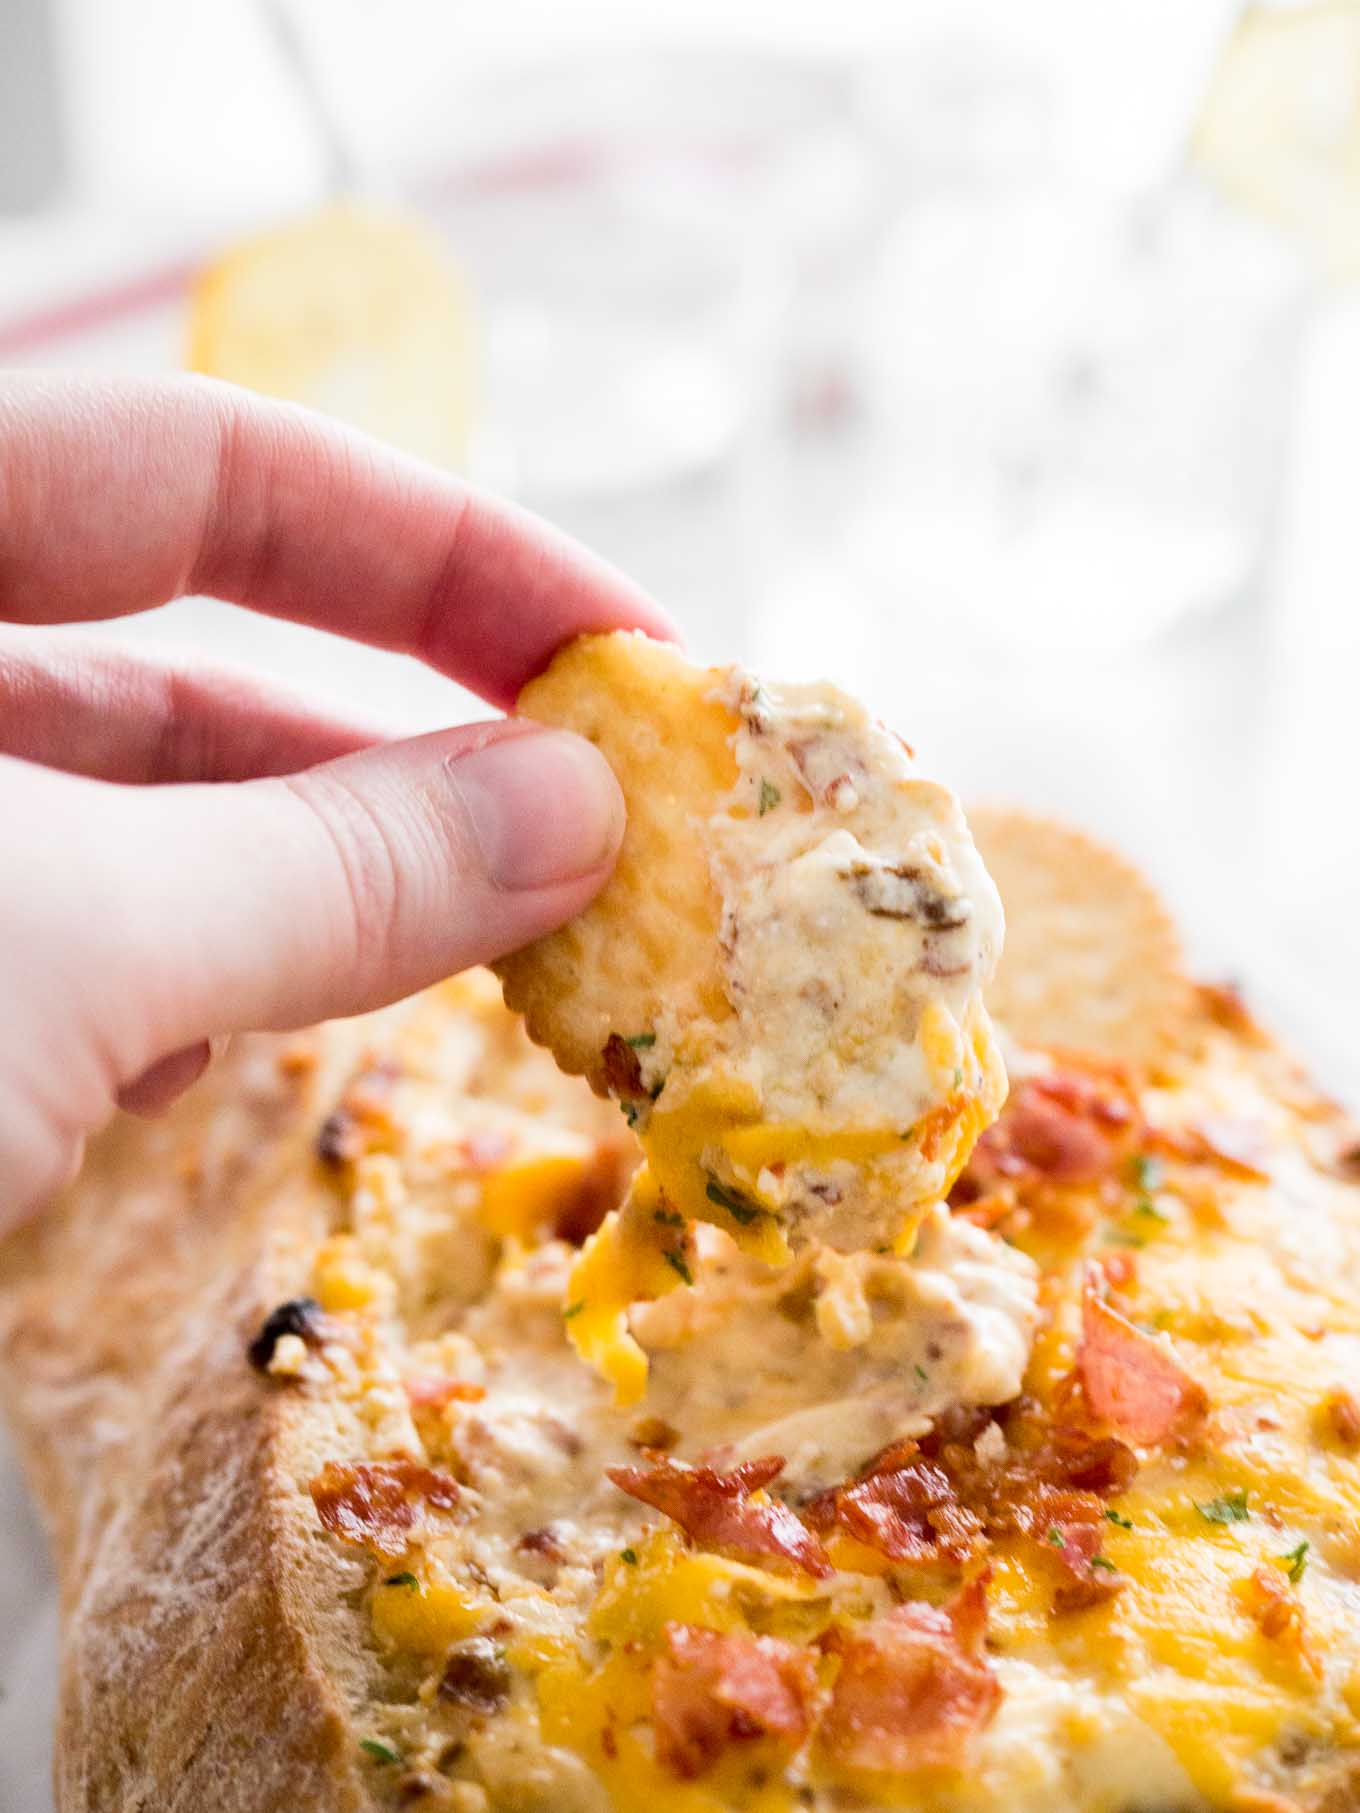 This Cheesy Bacon and Caramelized Onion Dip is sure to be a huge hit at your next party! A hot, creamy dip made with sweet onions, crispy bacon, and cheese that is so fast to make.